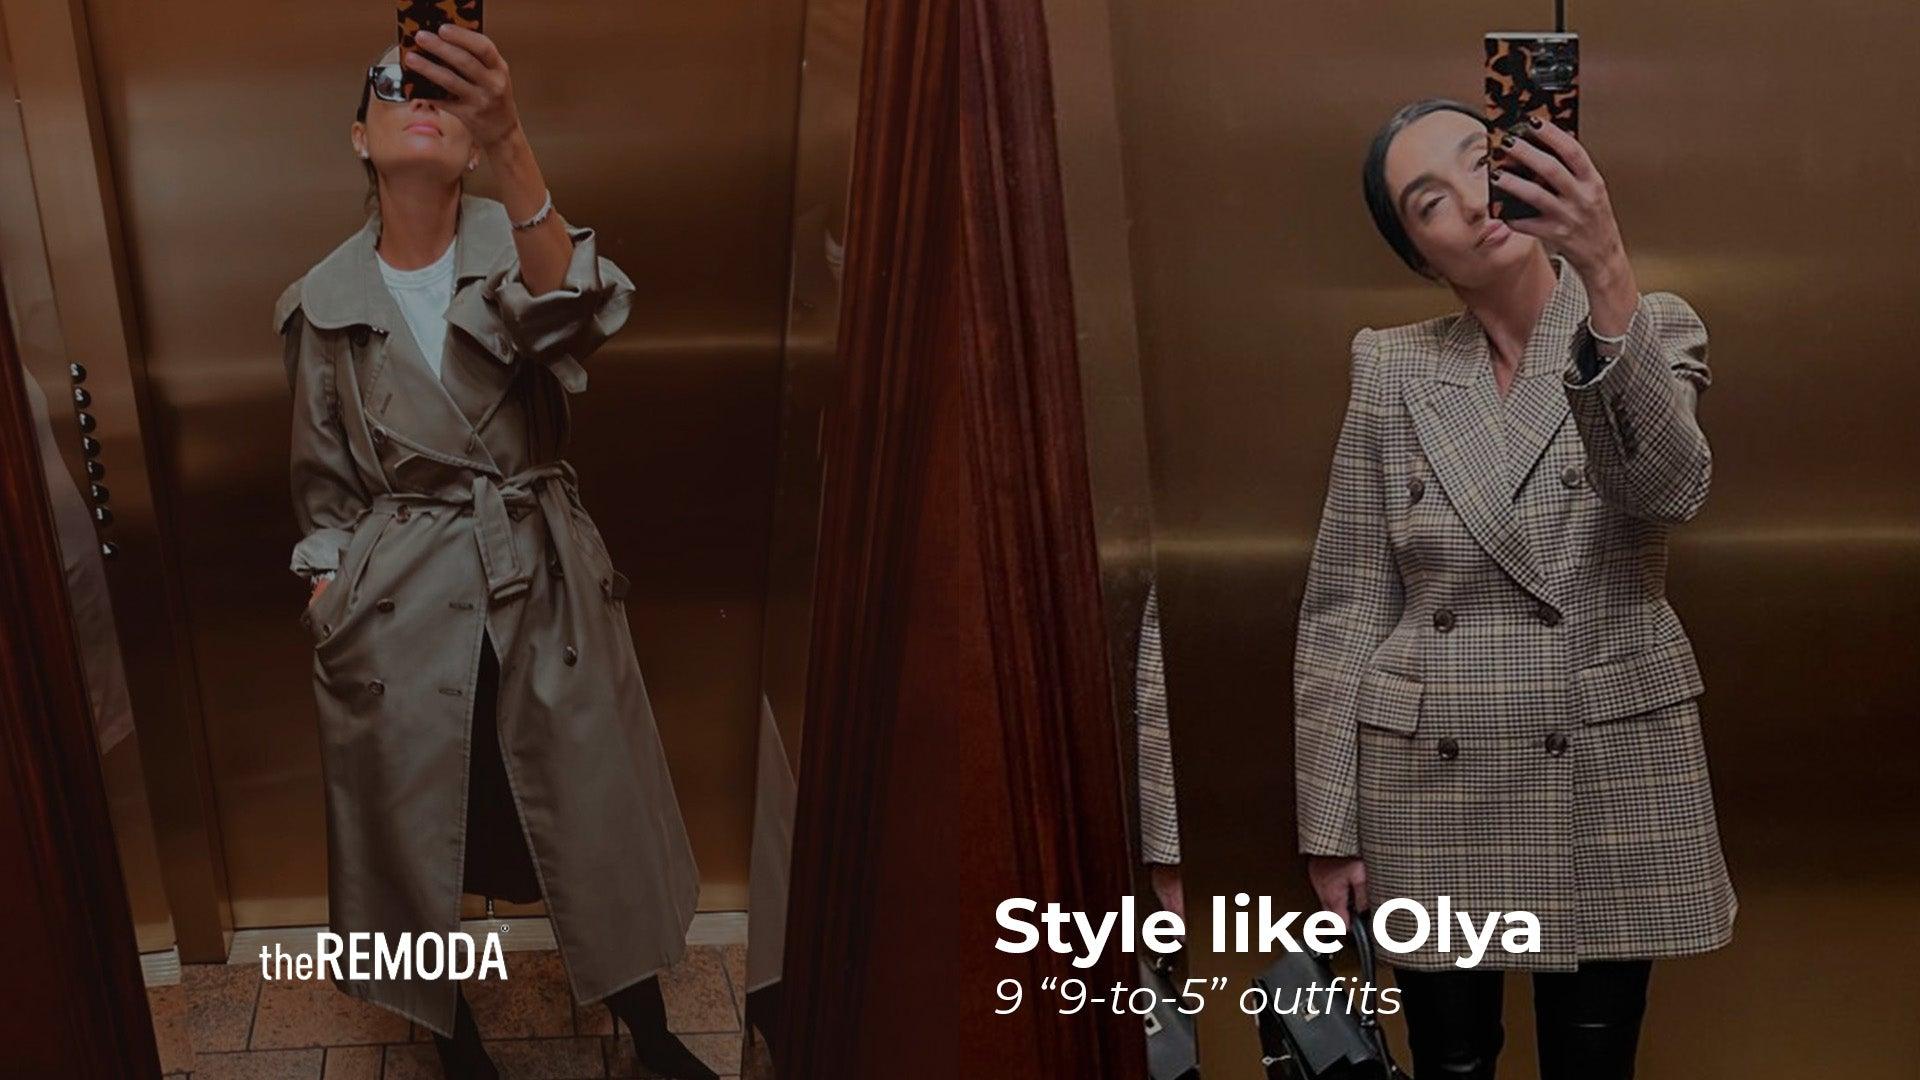 Style like Olya: 9 "9-to-5" outfits - theREMODA